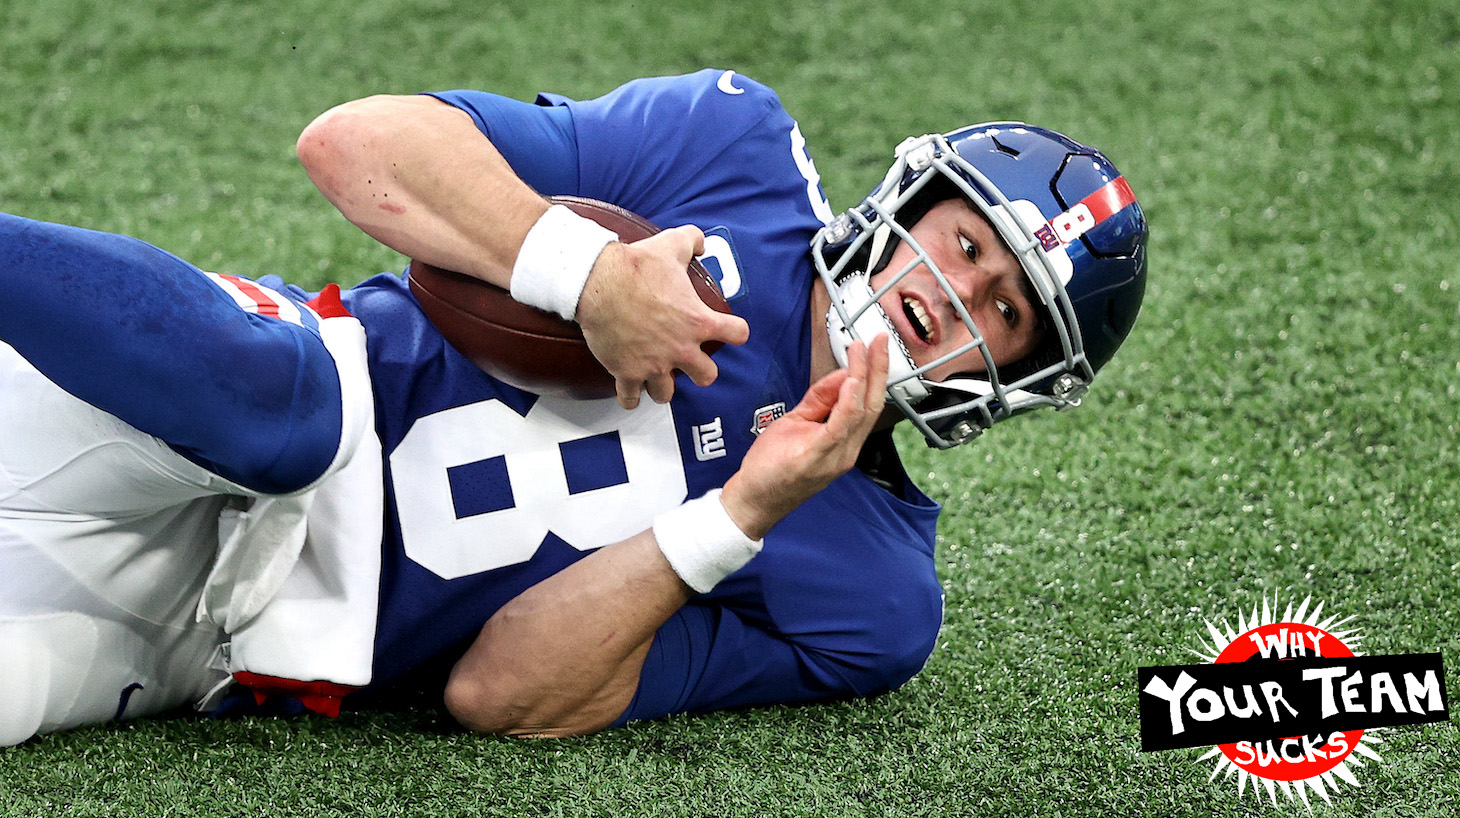 EAST RUTHERFORD, NEW JERSEY - JANUARY 03: Daniel Jones #8 of the New York Giants reacts after being tackled against the Dallas Cowboys during the first quarter at MetLife Stadium on January 03, 2021 in East Rutherford, New Jersey. (Photo by Elsa/Getty Images)